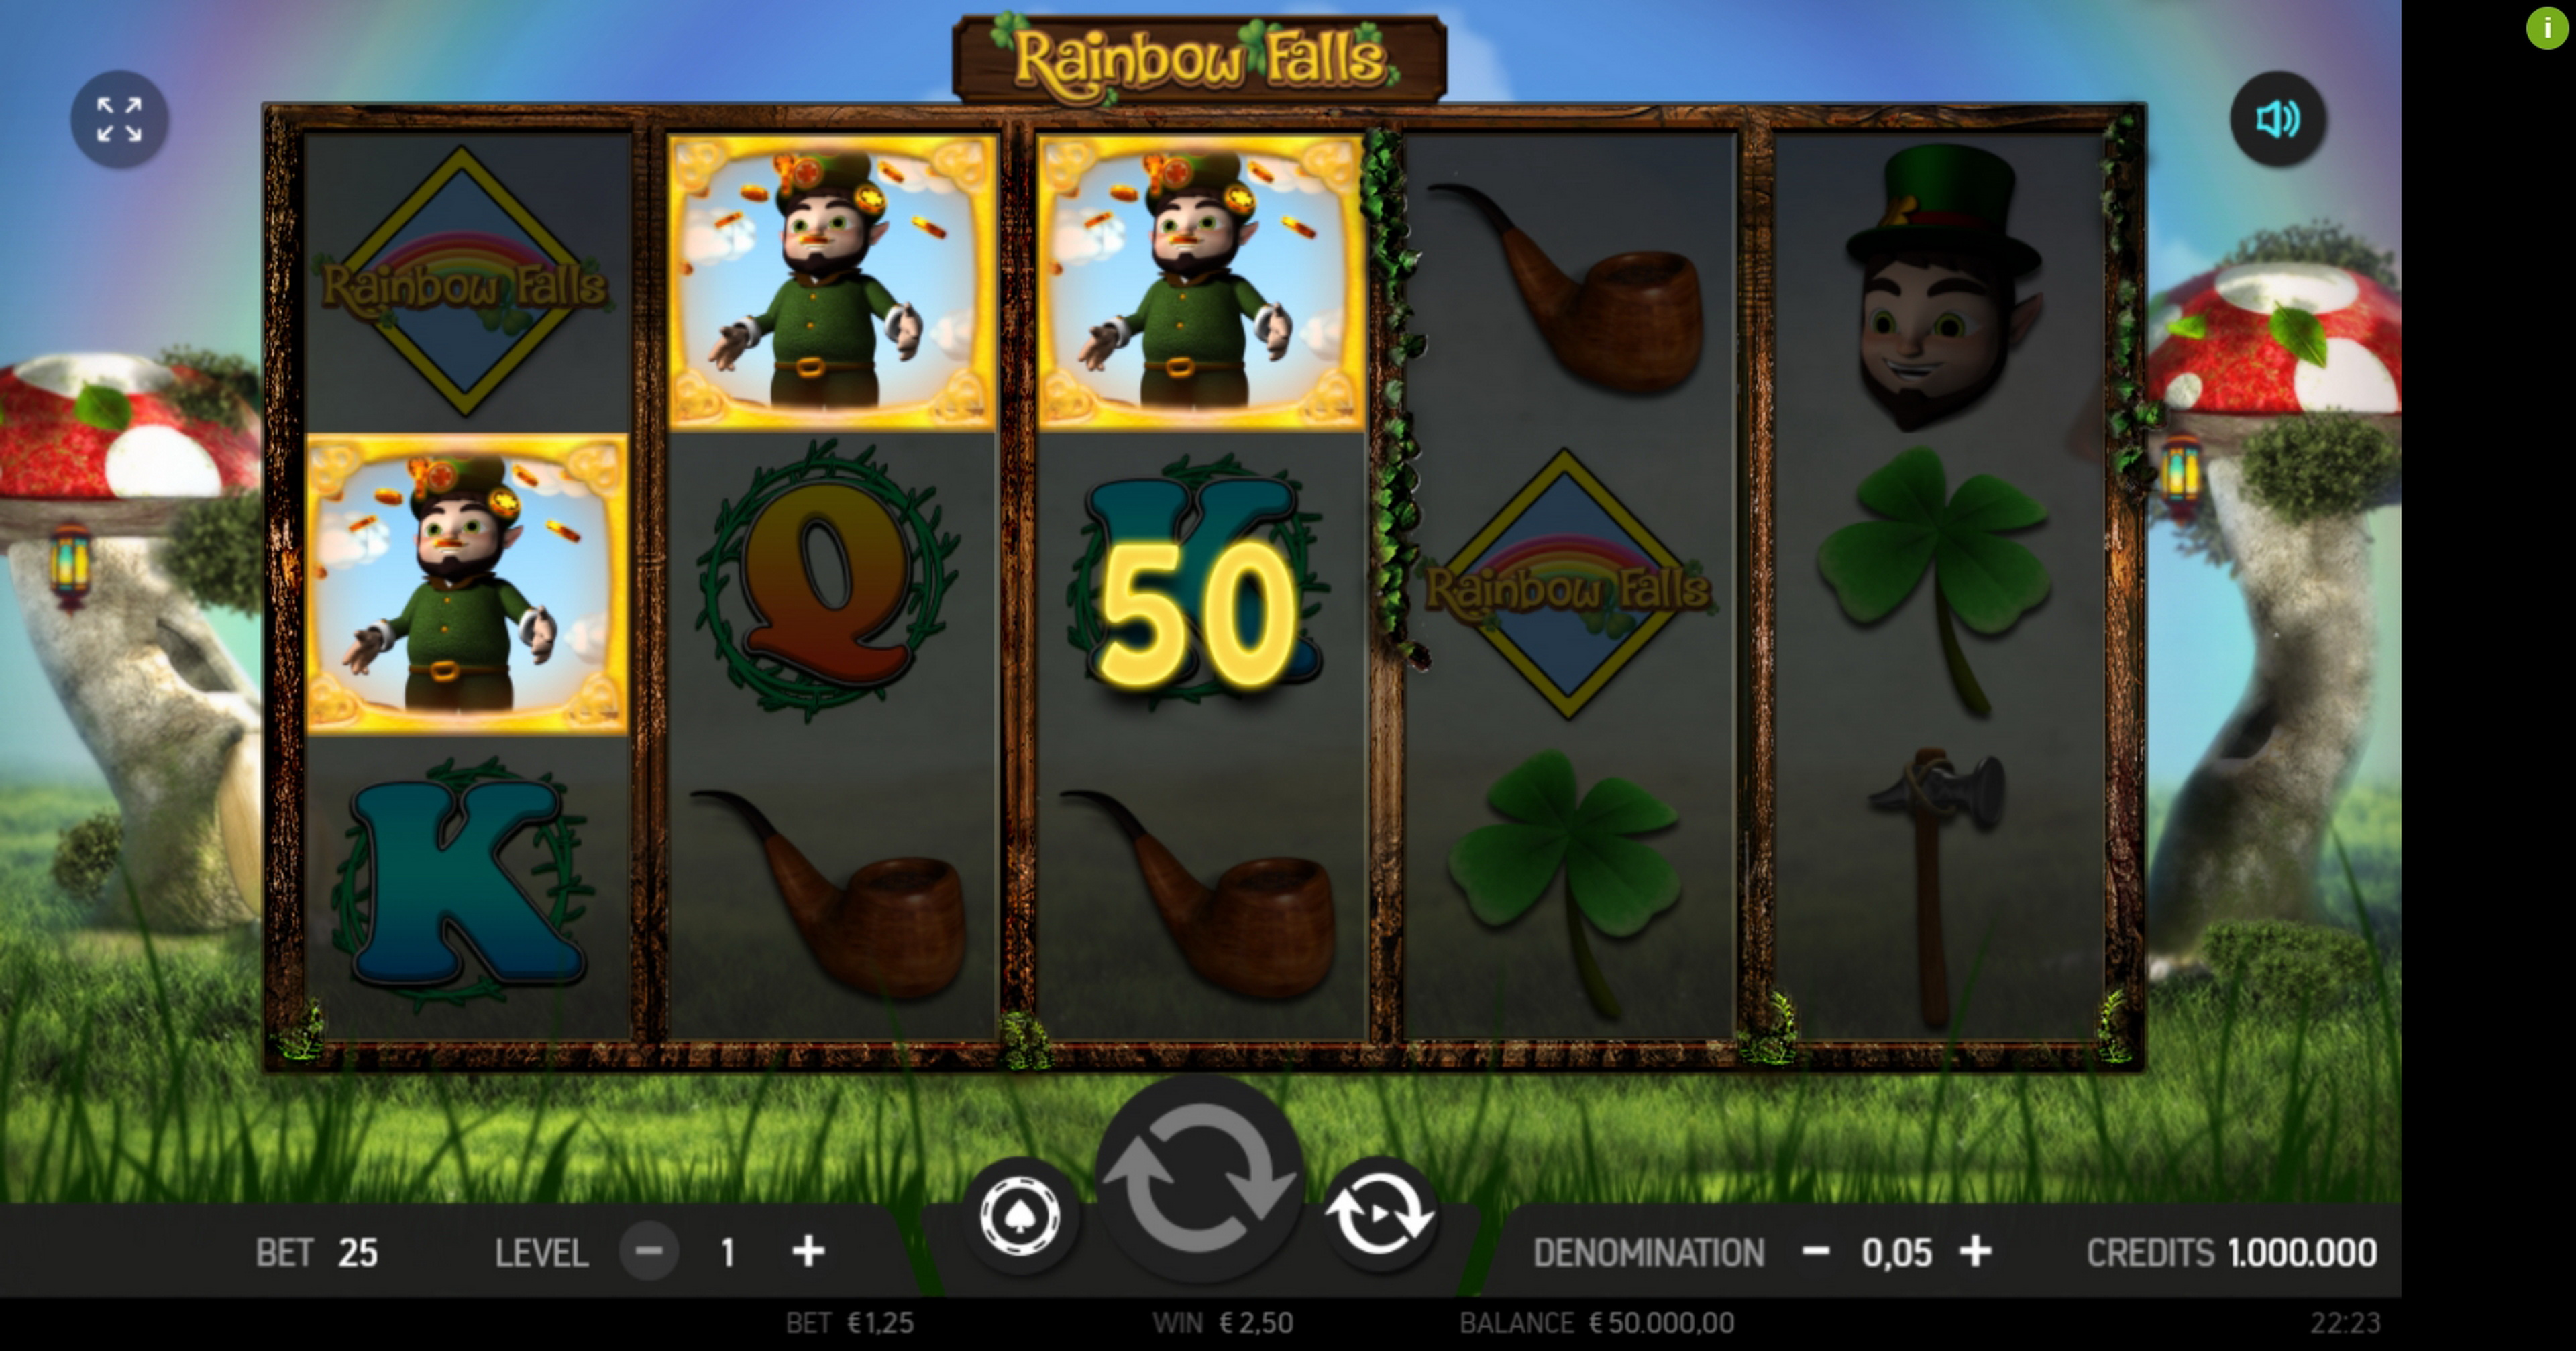 Win Money in Rainbow Falls Free Slot Game by FBM